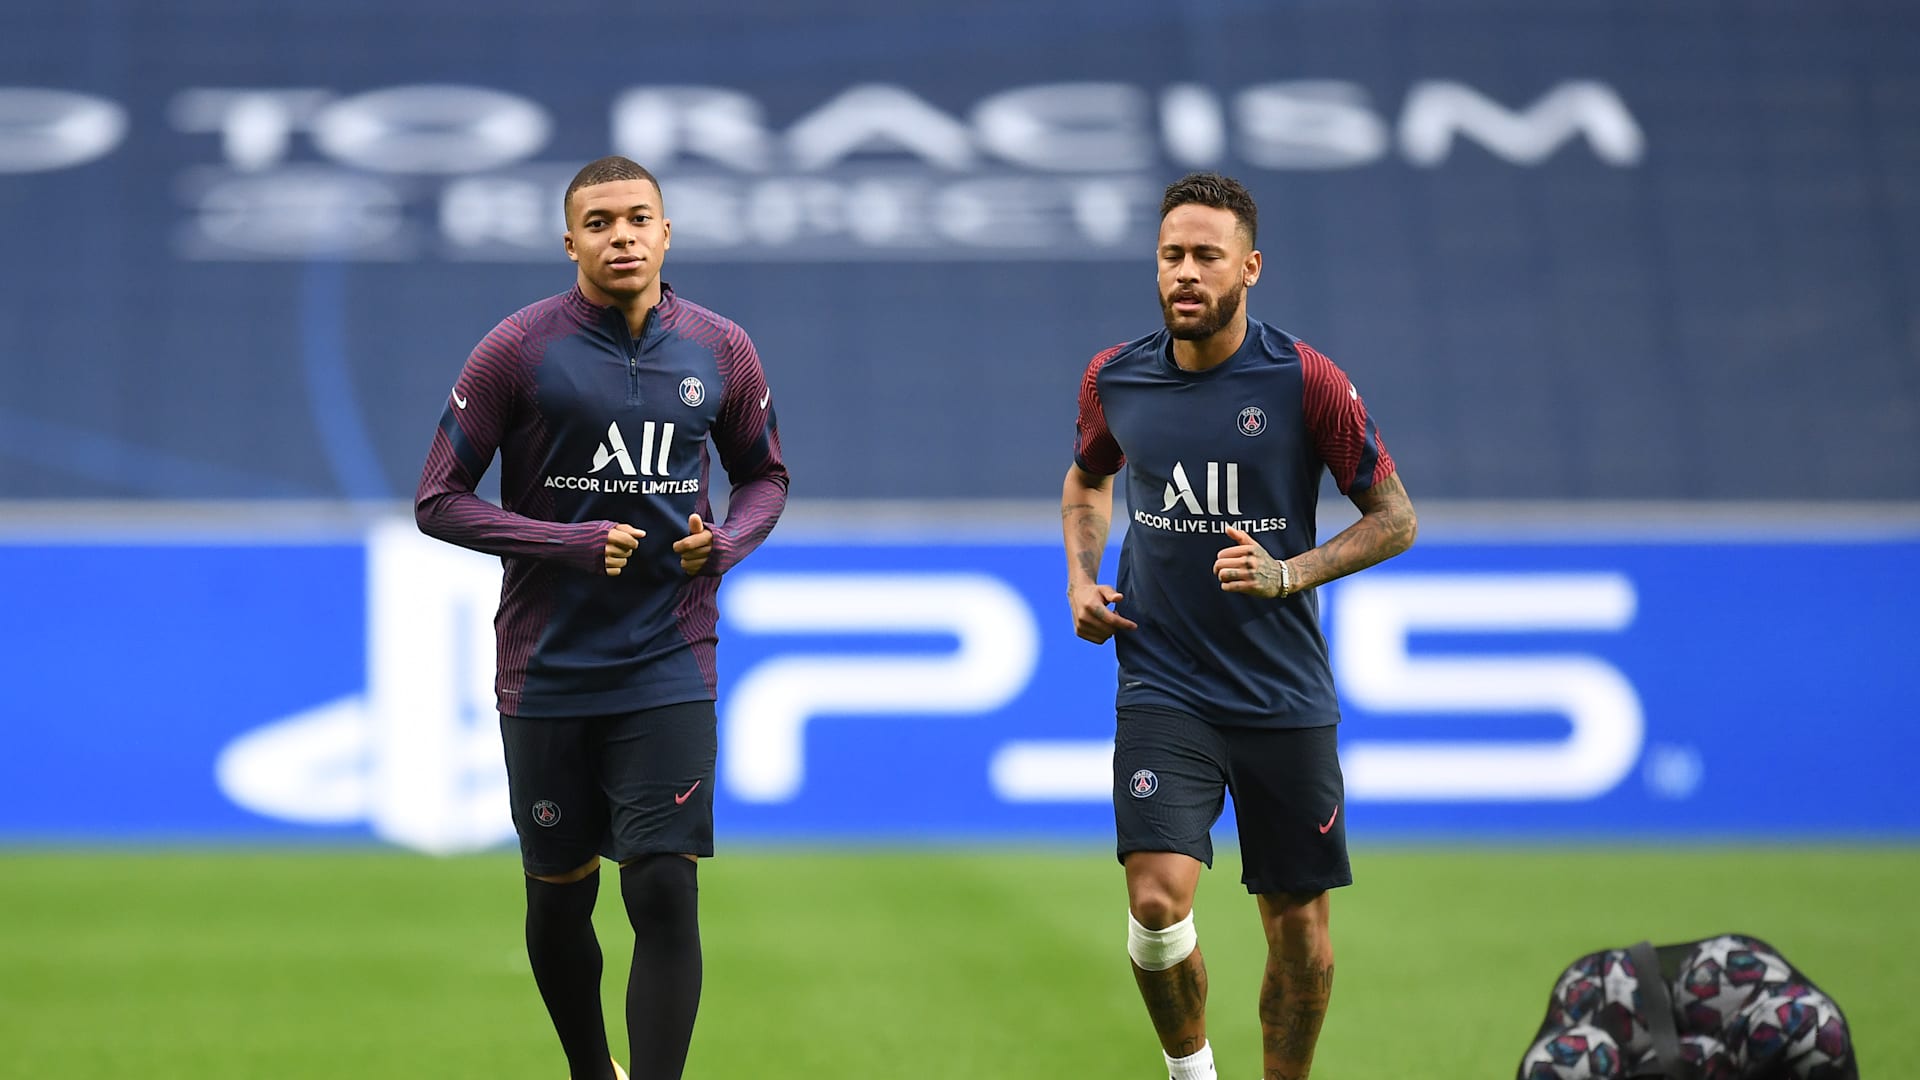 RB Leipzig vs PSG UEFA Champions League semi-final, live timings and where to get live streaming in India